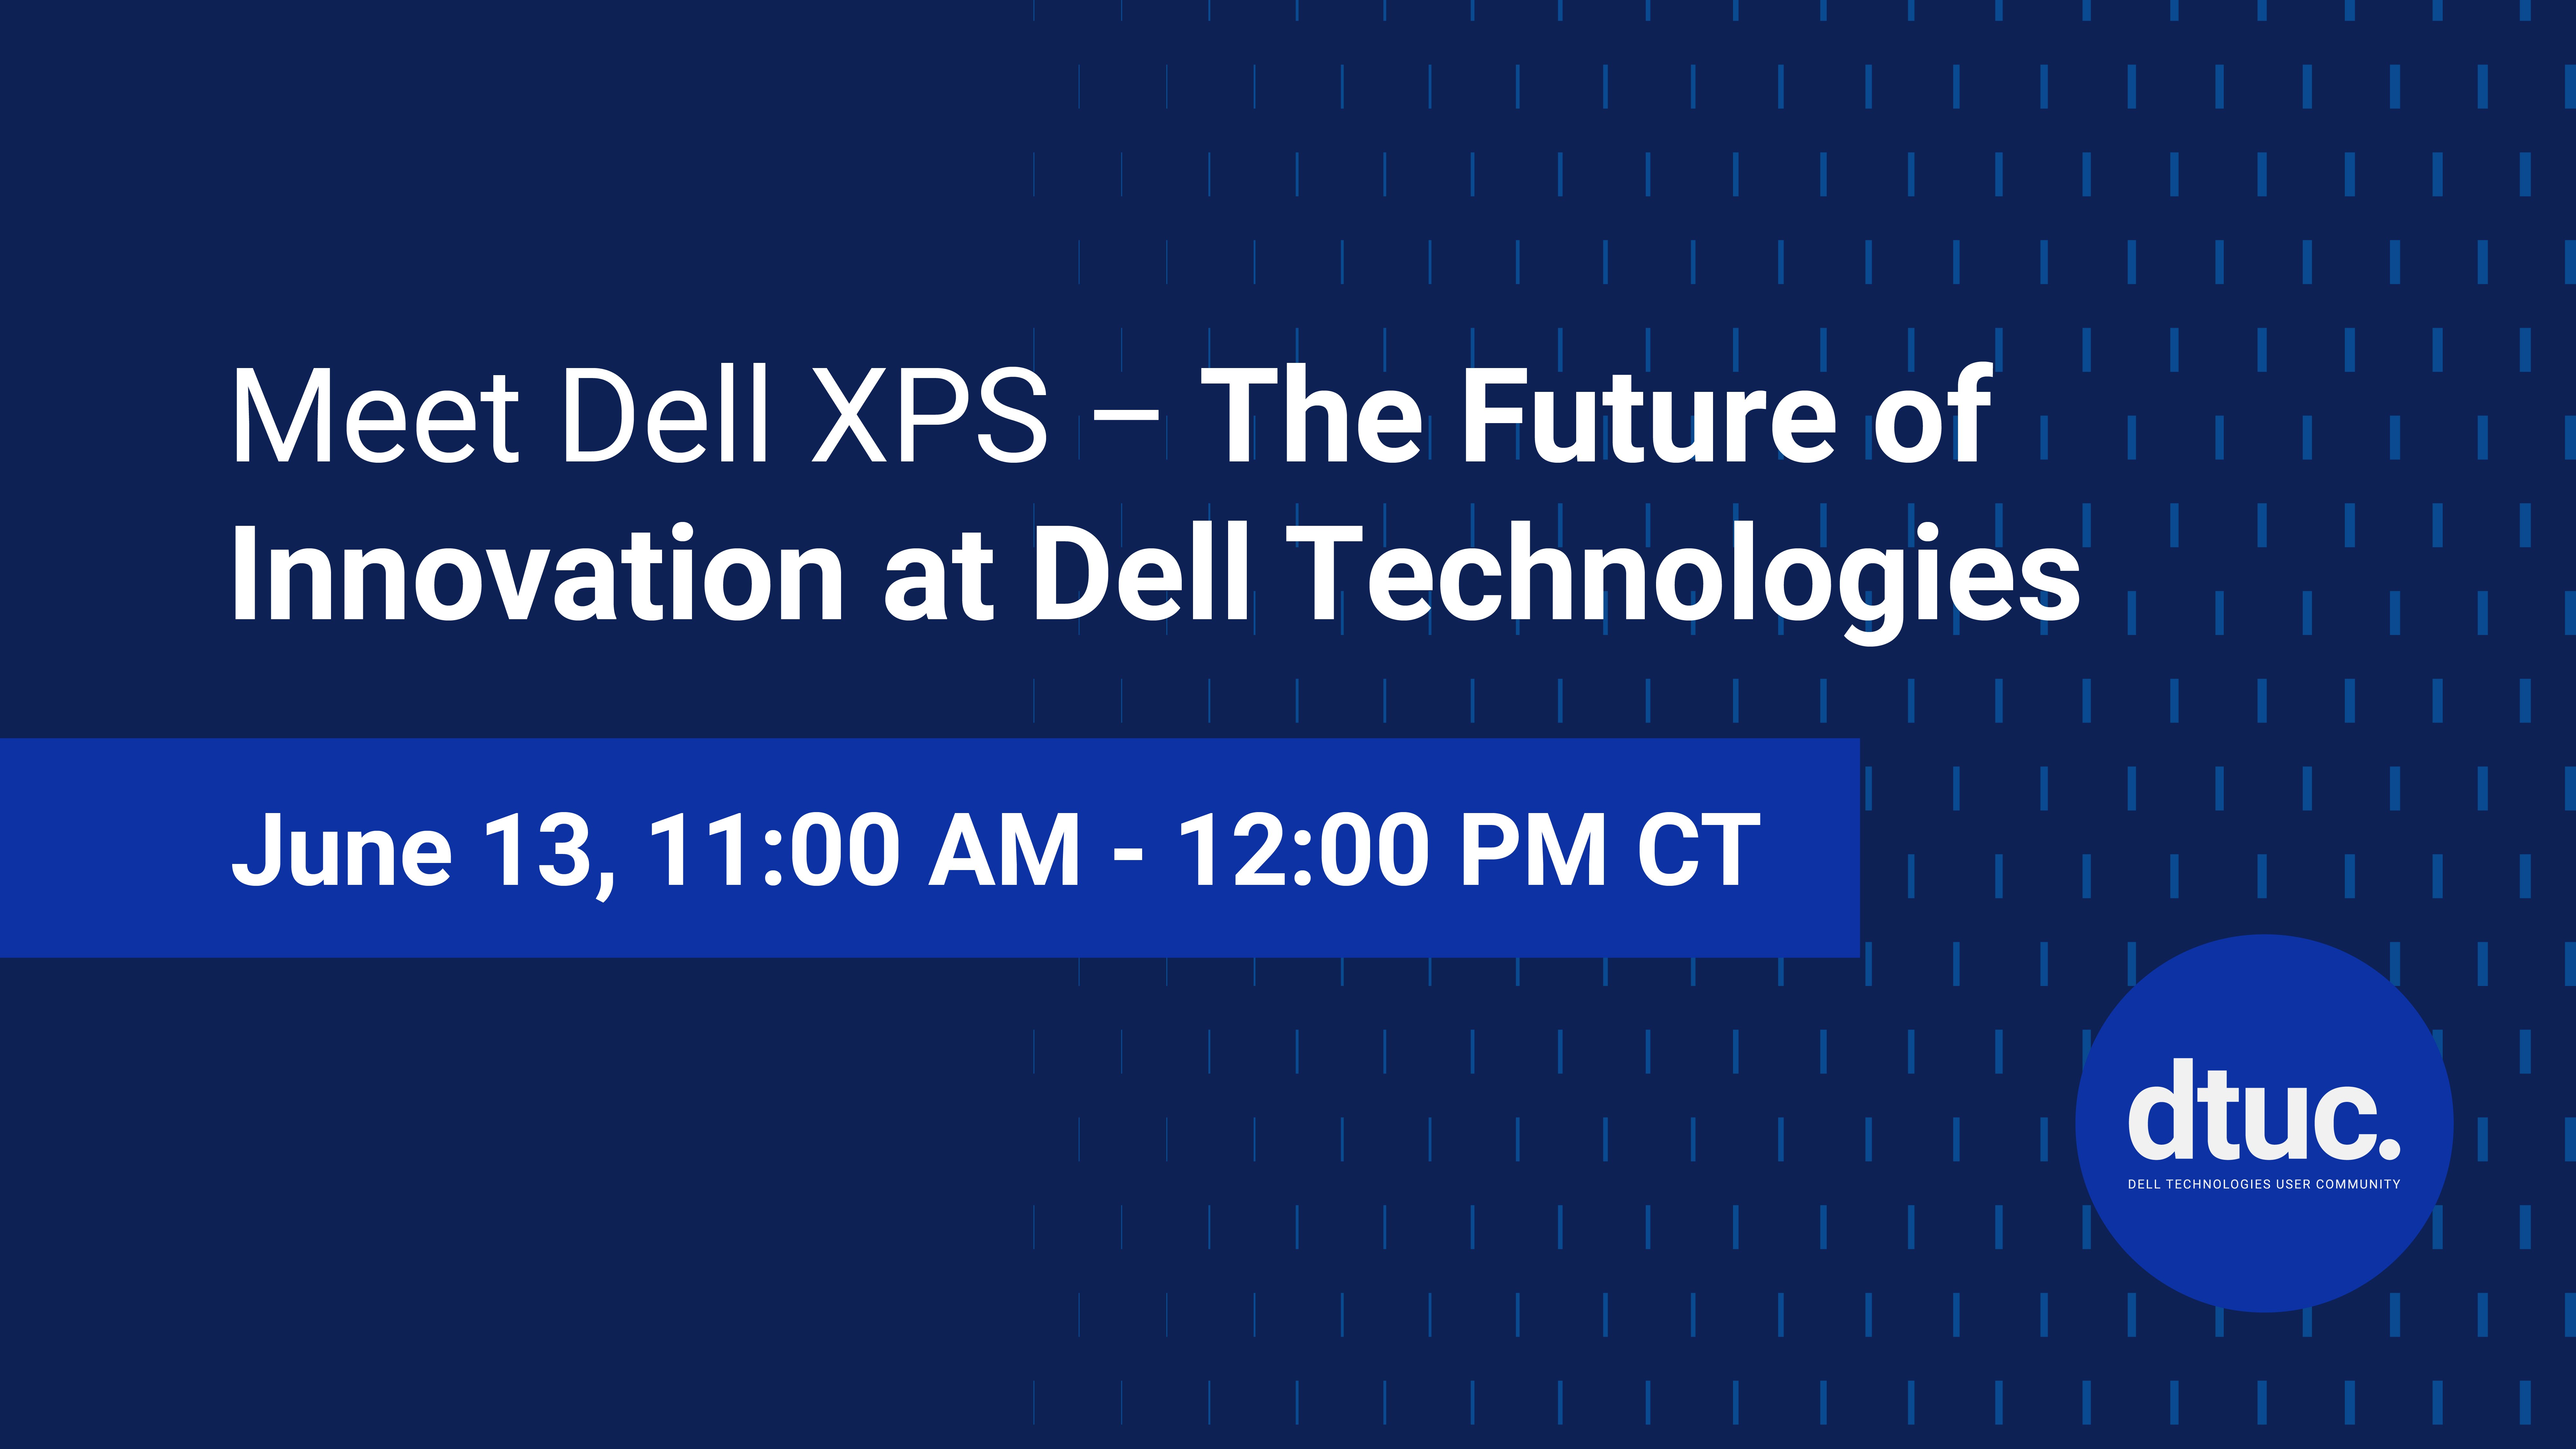 Meet Dell XPS - The Future of Innovation at Dell Technologies